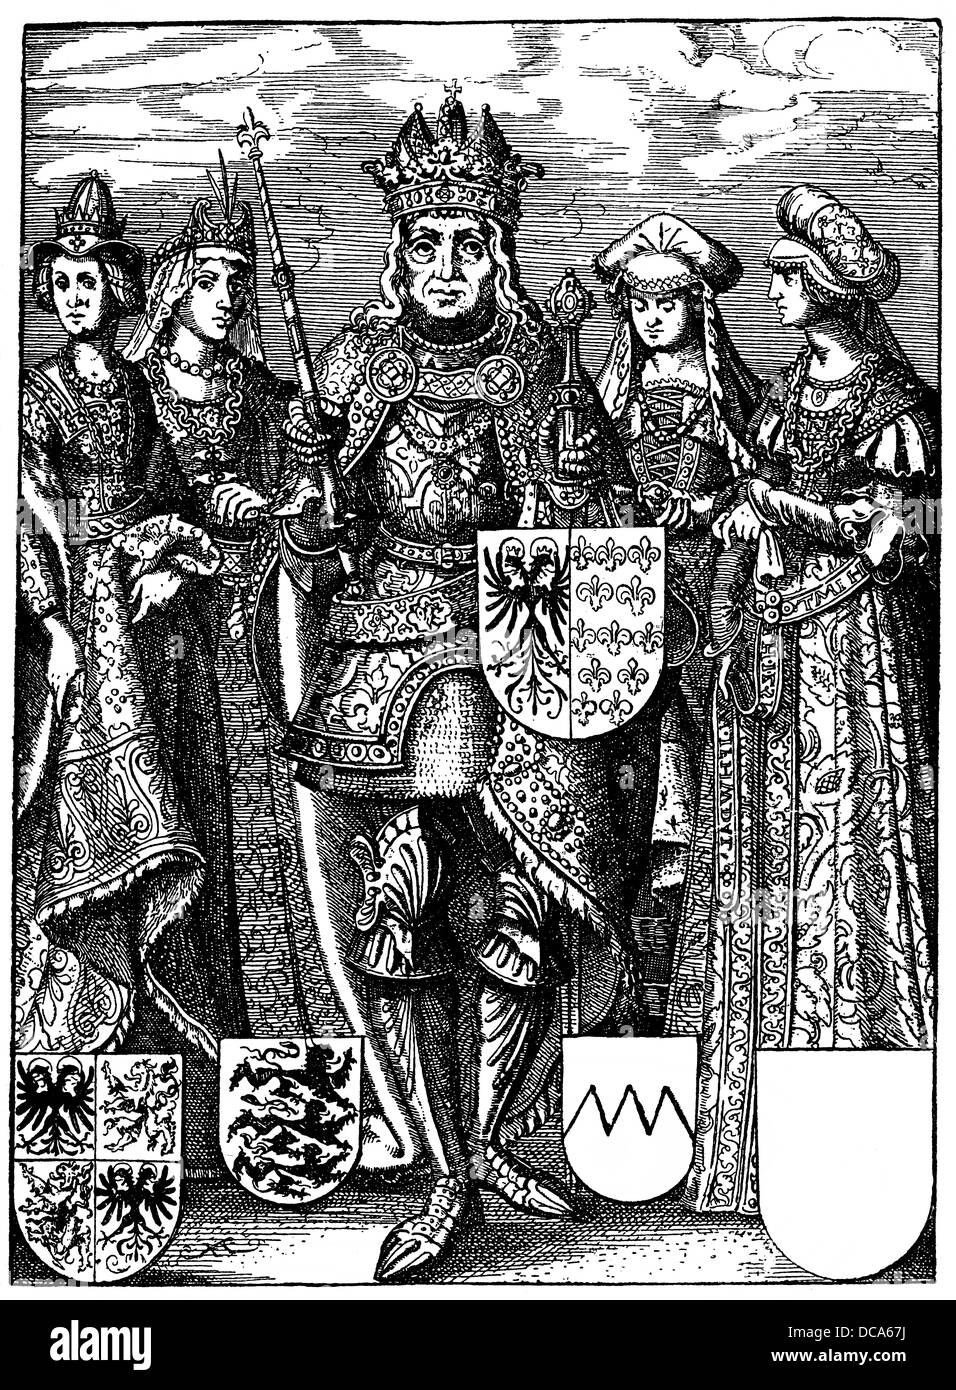 Charles the Great, Carolus Magnus or Charlemagne, 747 - 814, King of the Frankish Empire and Roman Emperor, with his 4 wives Stock Photo